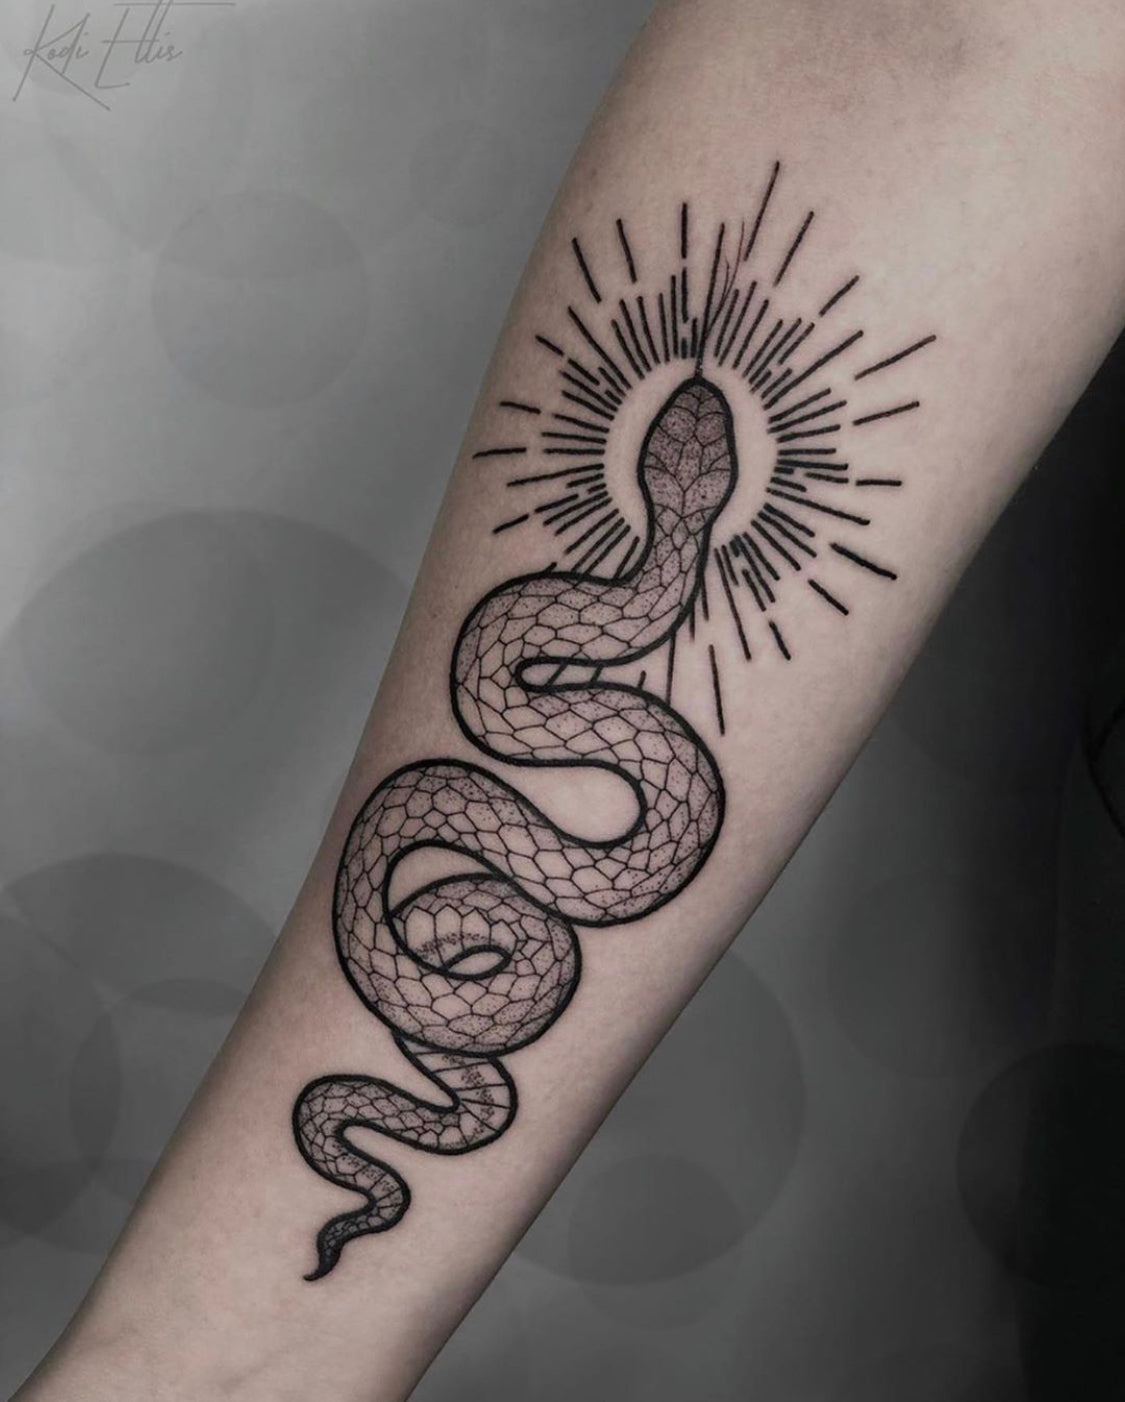 Simple line work snake for Abby from a while ago thank you Done  studioxiiigallery      Studio XIII Gallery